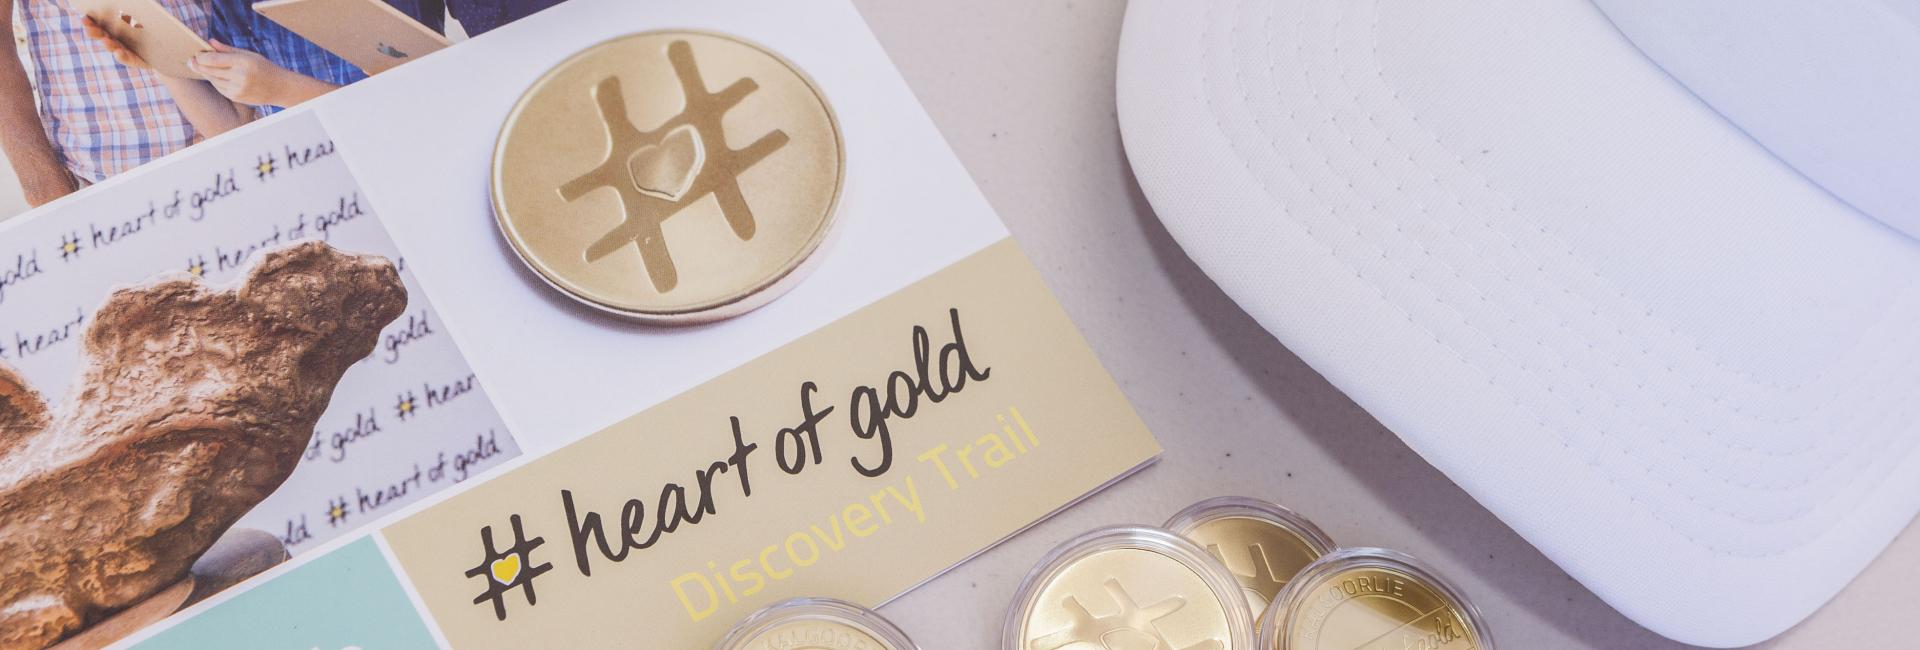 Discover the Heart of Gold Discovery Trail